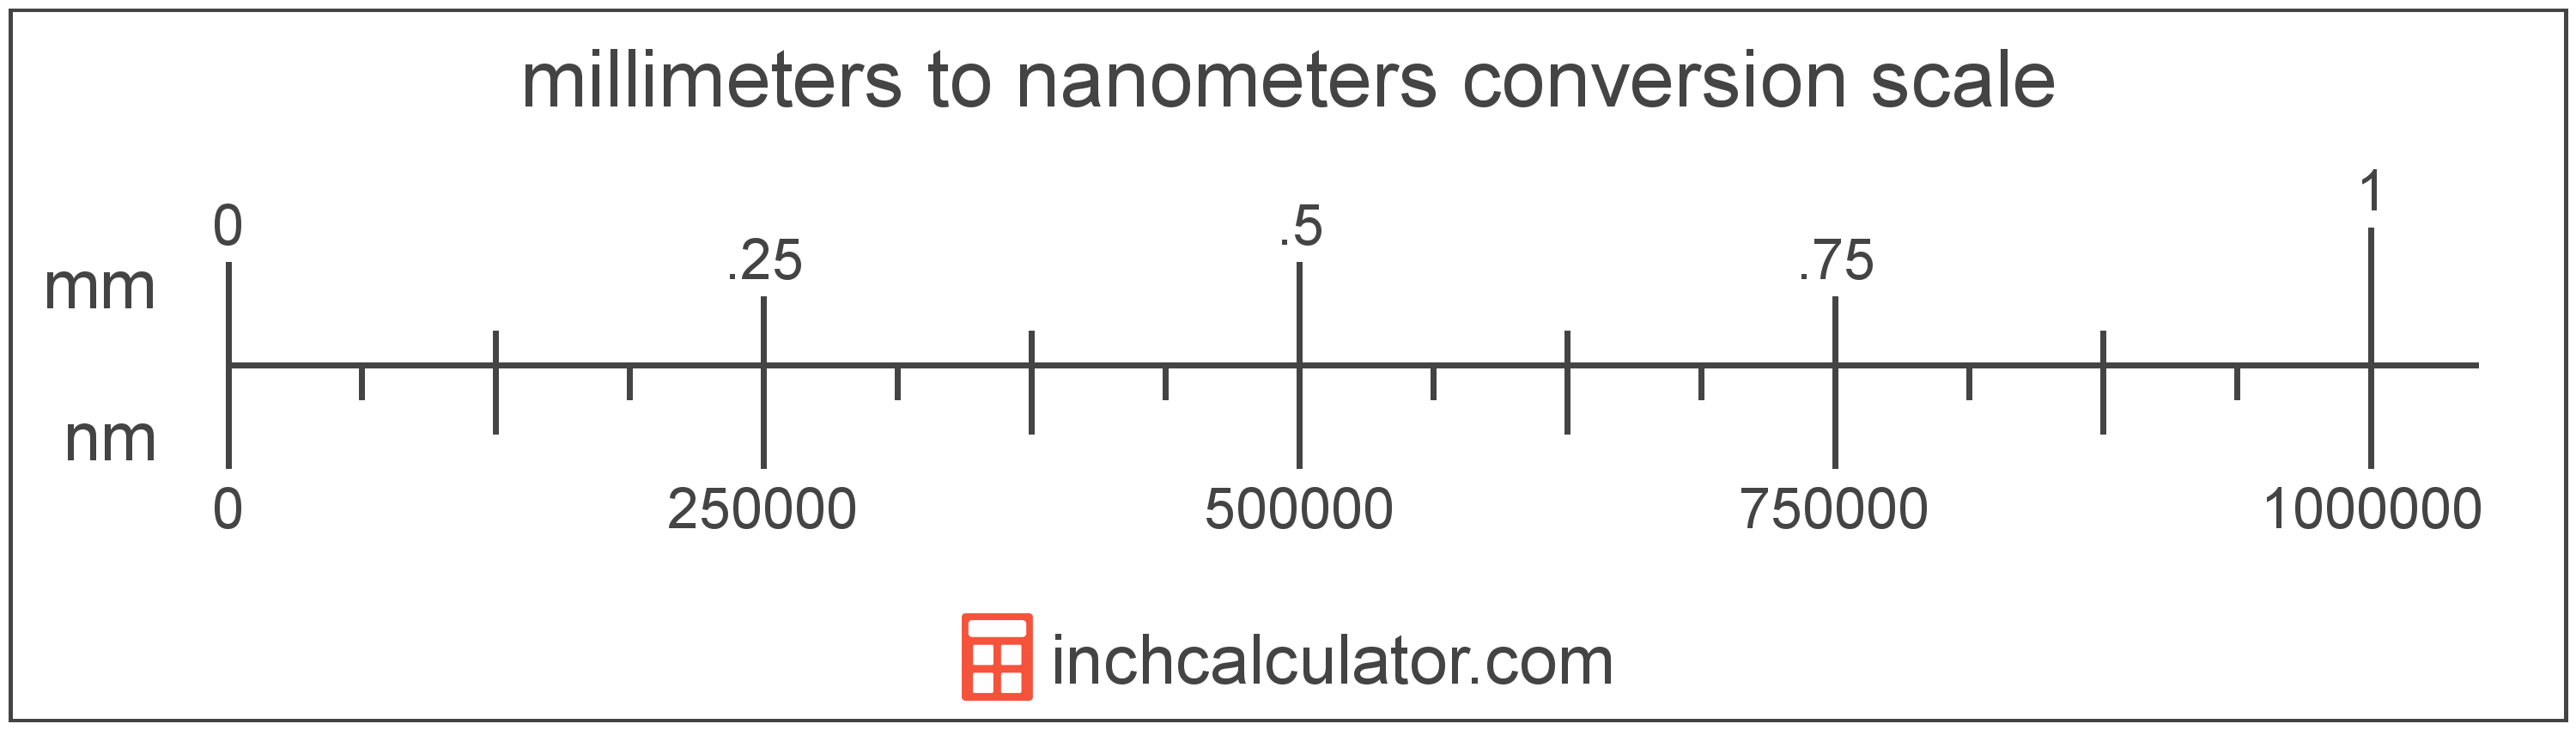 conversion scale showing millimeters and equivalent nanometers length values